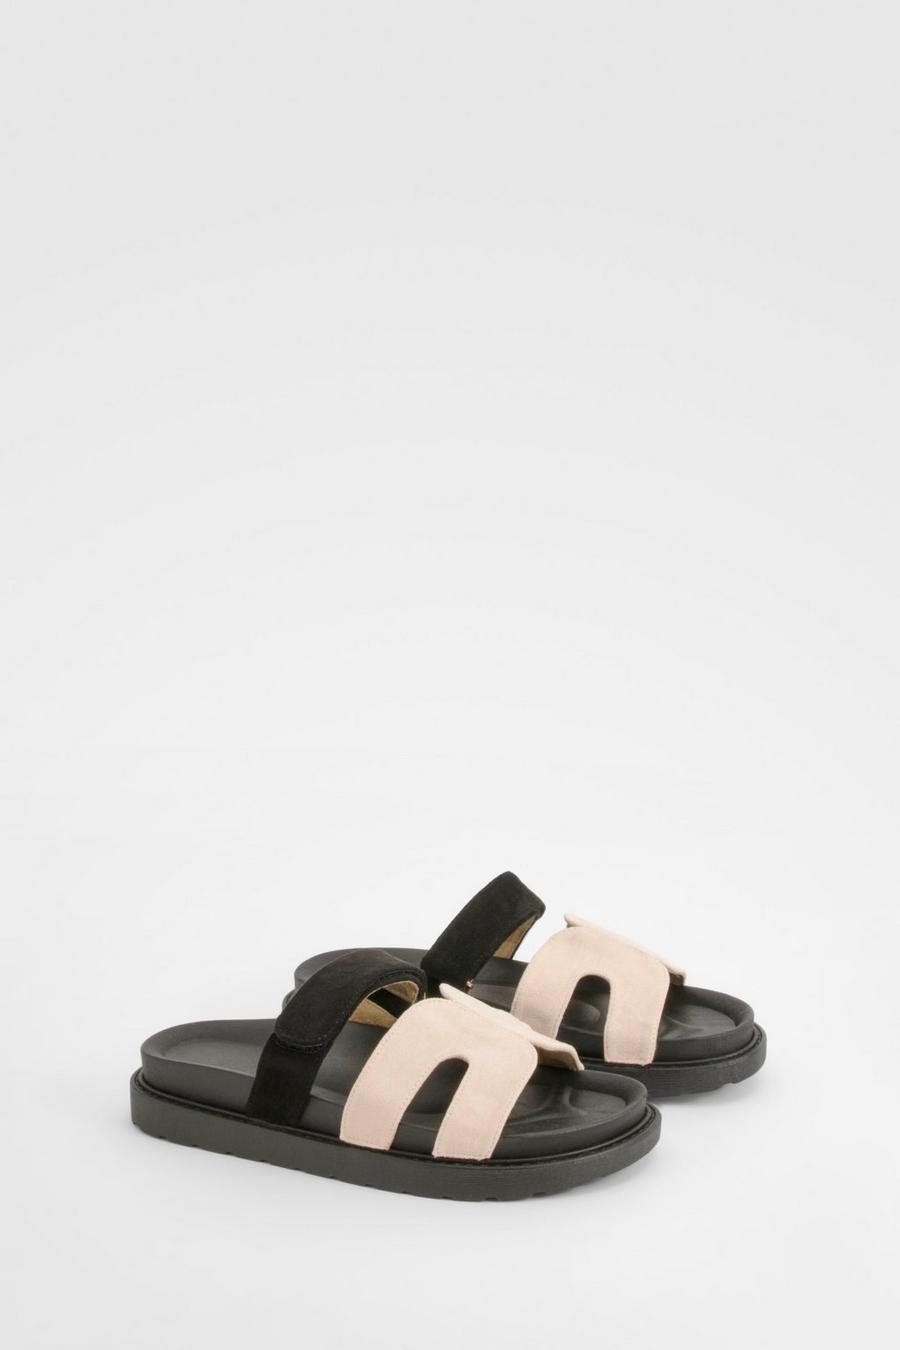 Nude Cut Out Detail Contrast Strap Sliders   